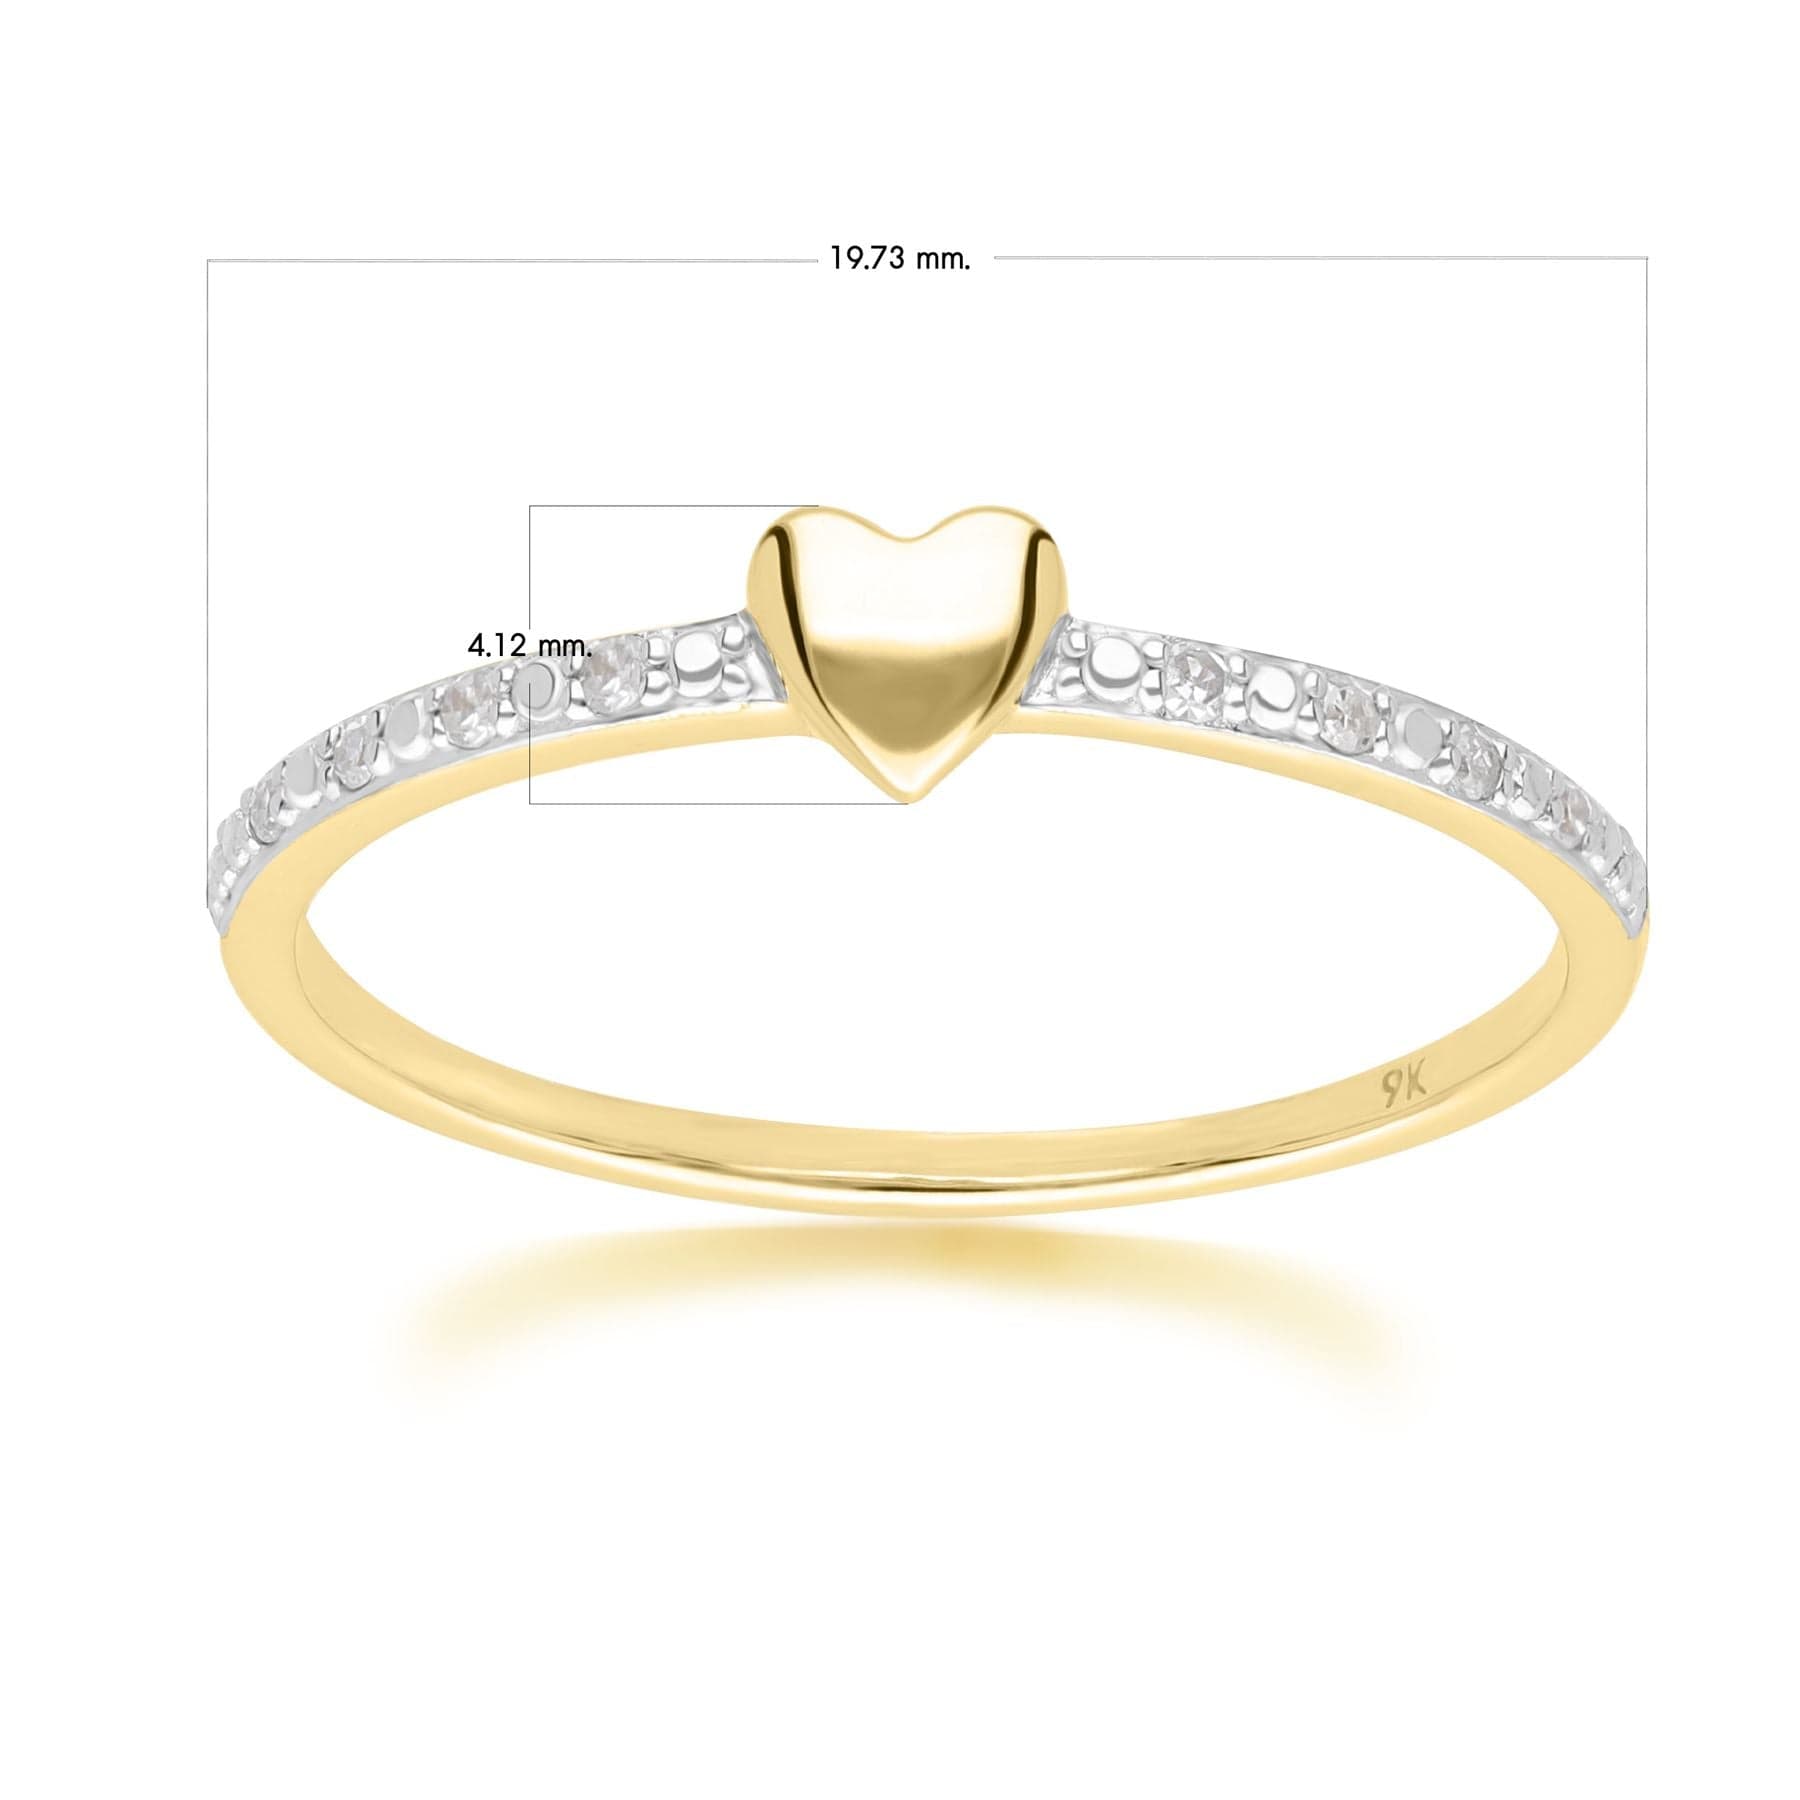 191R0936019 Dainty Love Heart Diamond Band Ring in 9ct Yellow Gold Dimensions